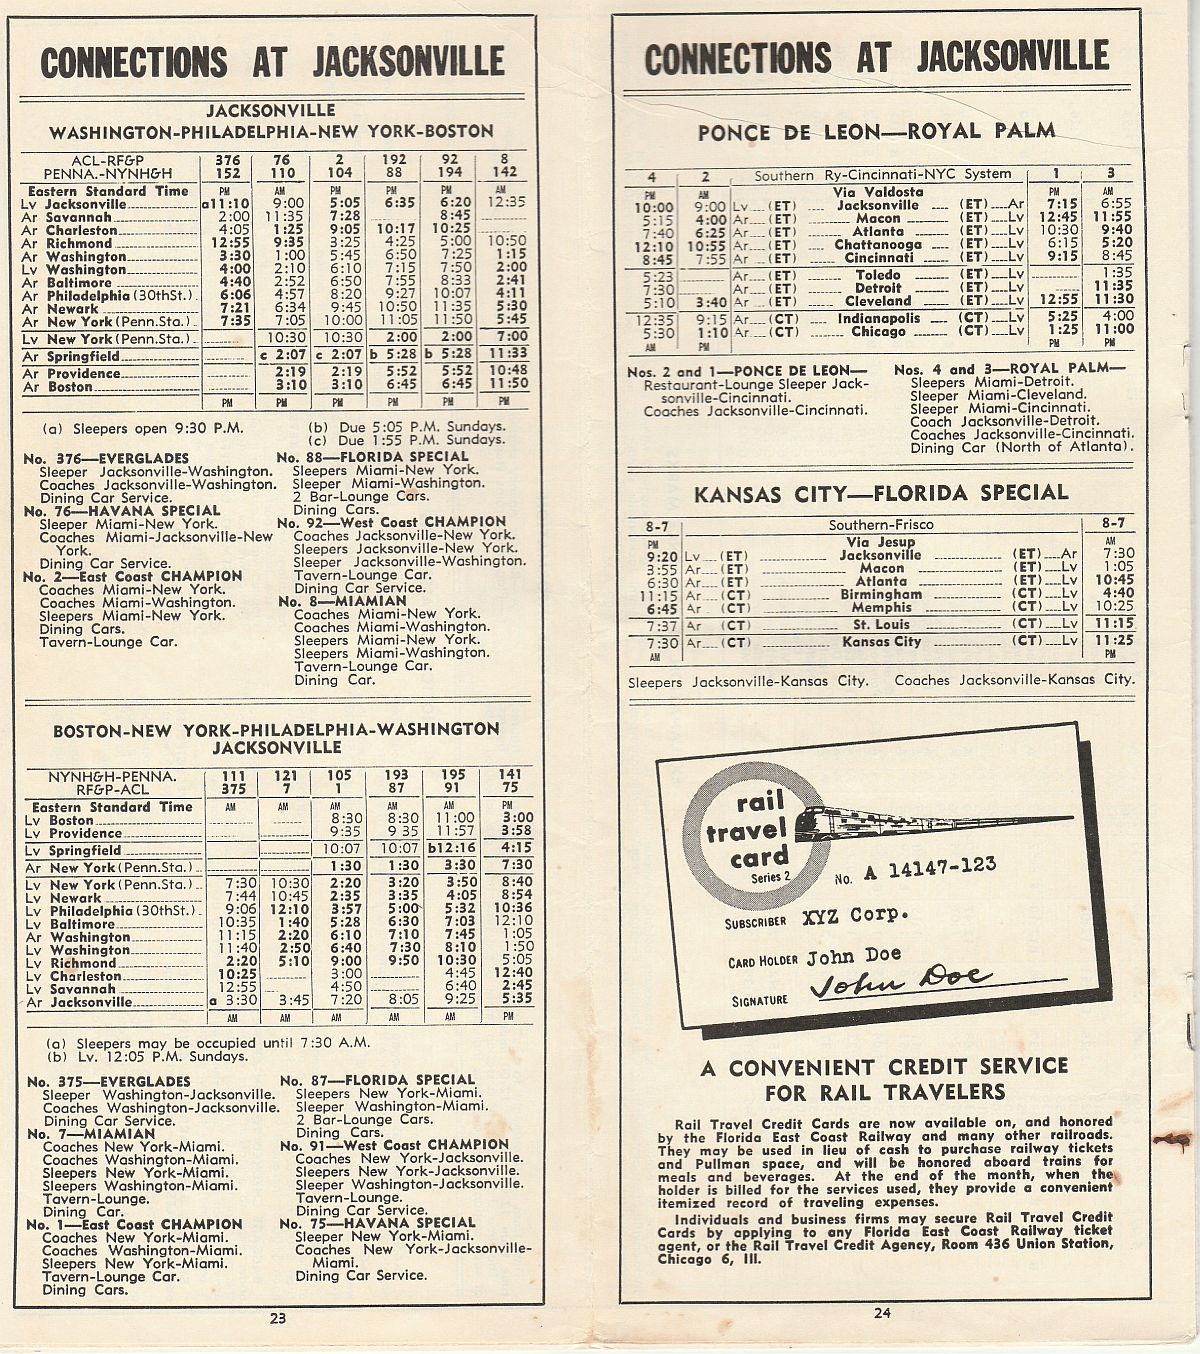 Florida East Coast Railway Dec. 12, 1957 timetable Pg. 23-24: Connections at Jacksonville Connecting trains at Jacksonville with the Atlantic Coast Line, R.F. & P., Pennsylvania, New Haven, Southern, New York Central and Frisco Railroads; Rail Travel Card